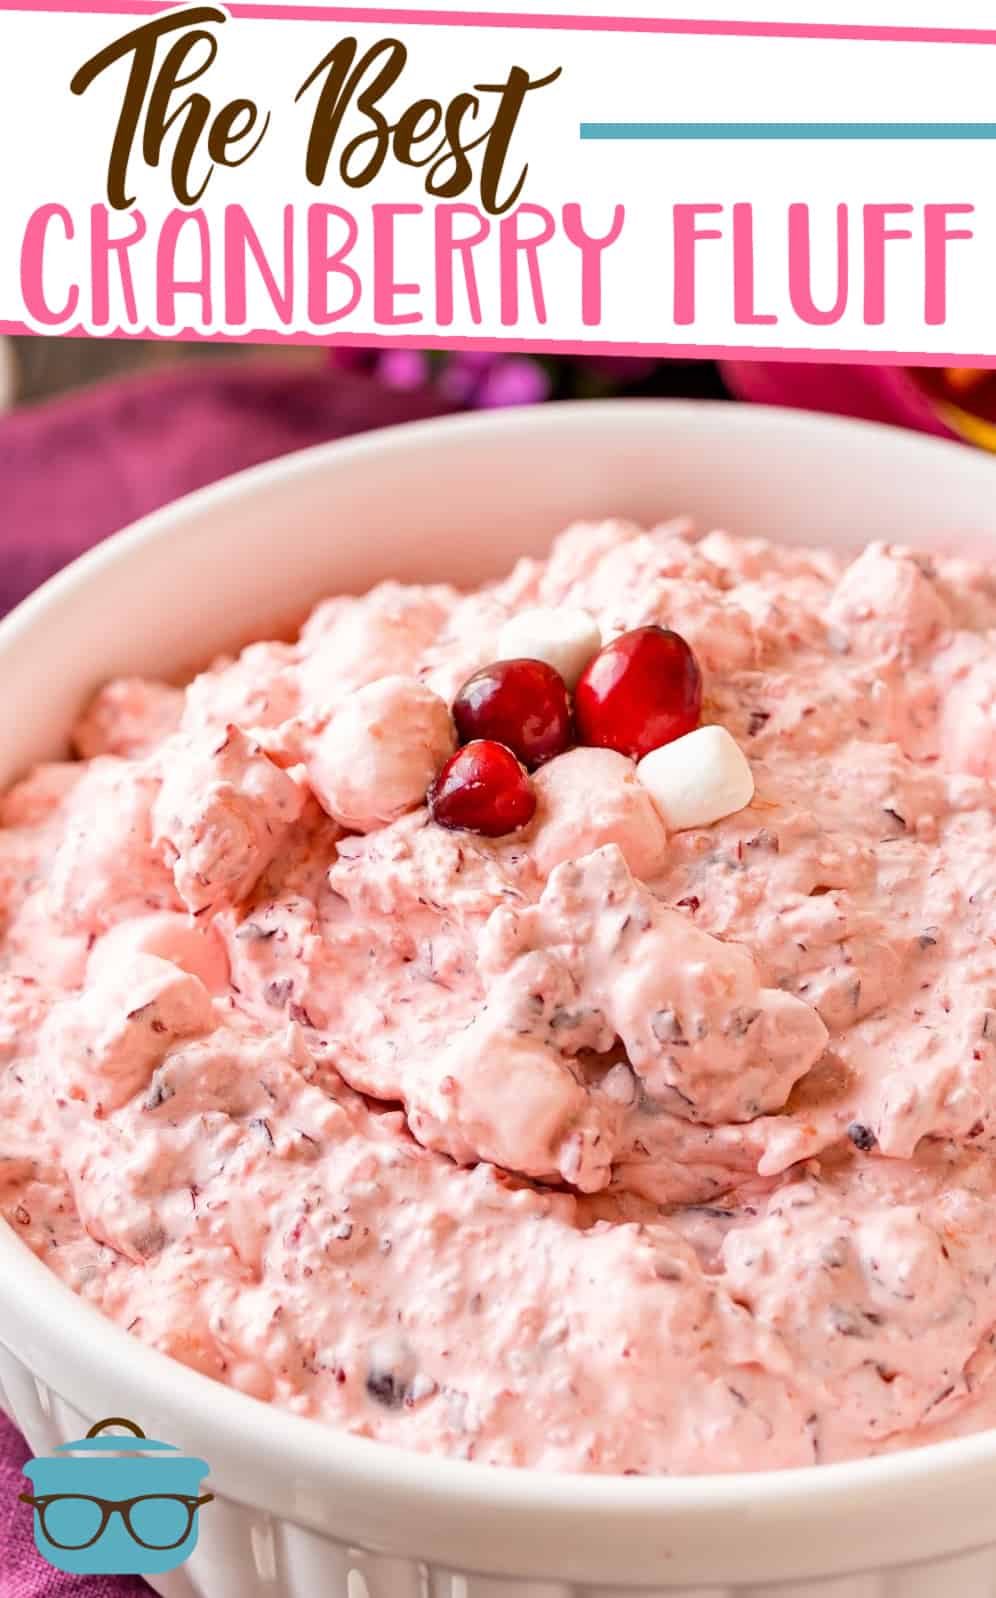 The Best Cranberry Fluff recipe from The Country Cook, shown in a white bowl topped with fresh cranberries and mini marshmallows.